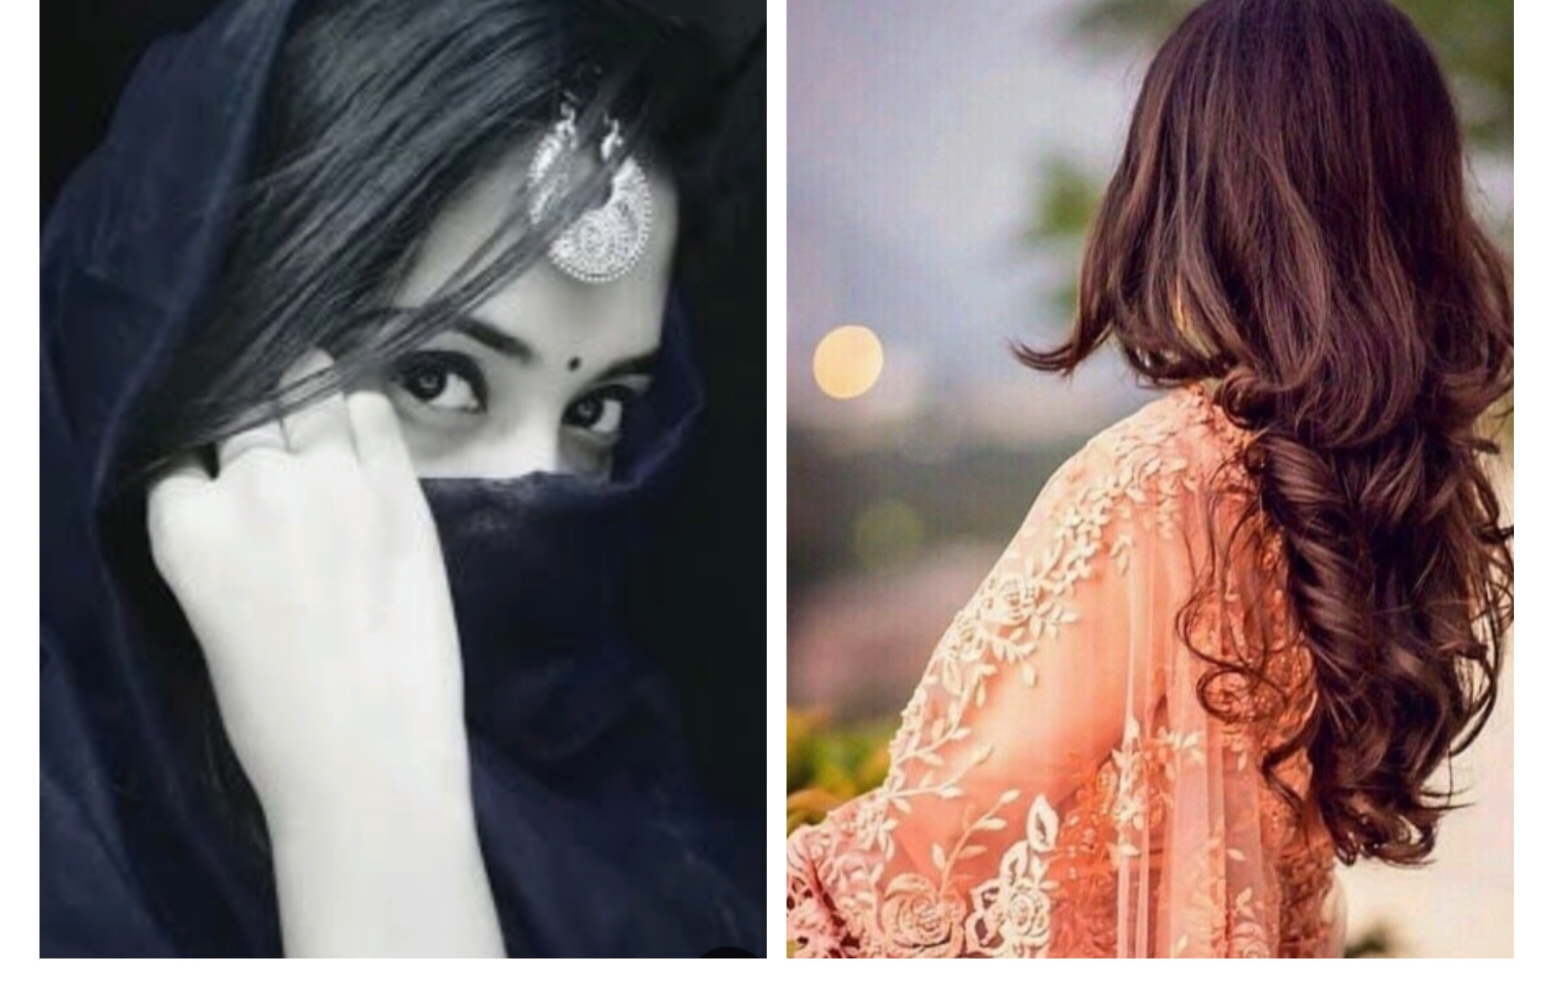 Sushma Rohit Dp For Girls Without Face Dp Poses For Girls Girl Hidden Face Poses Hidden Face